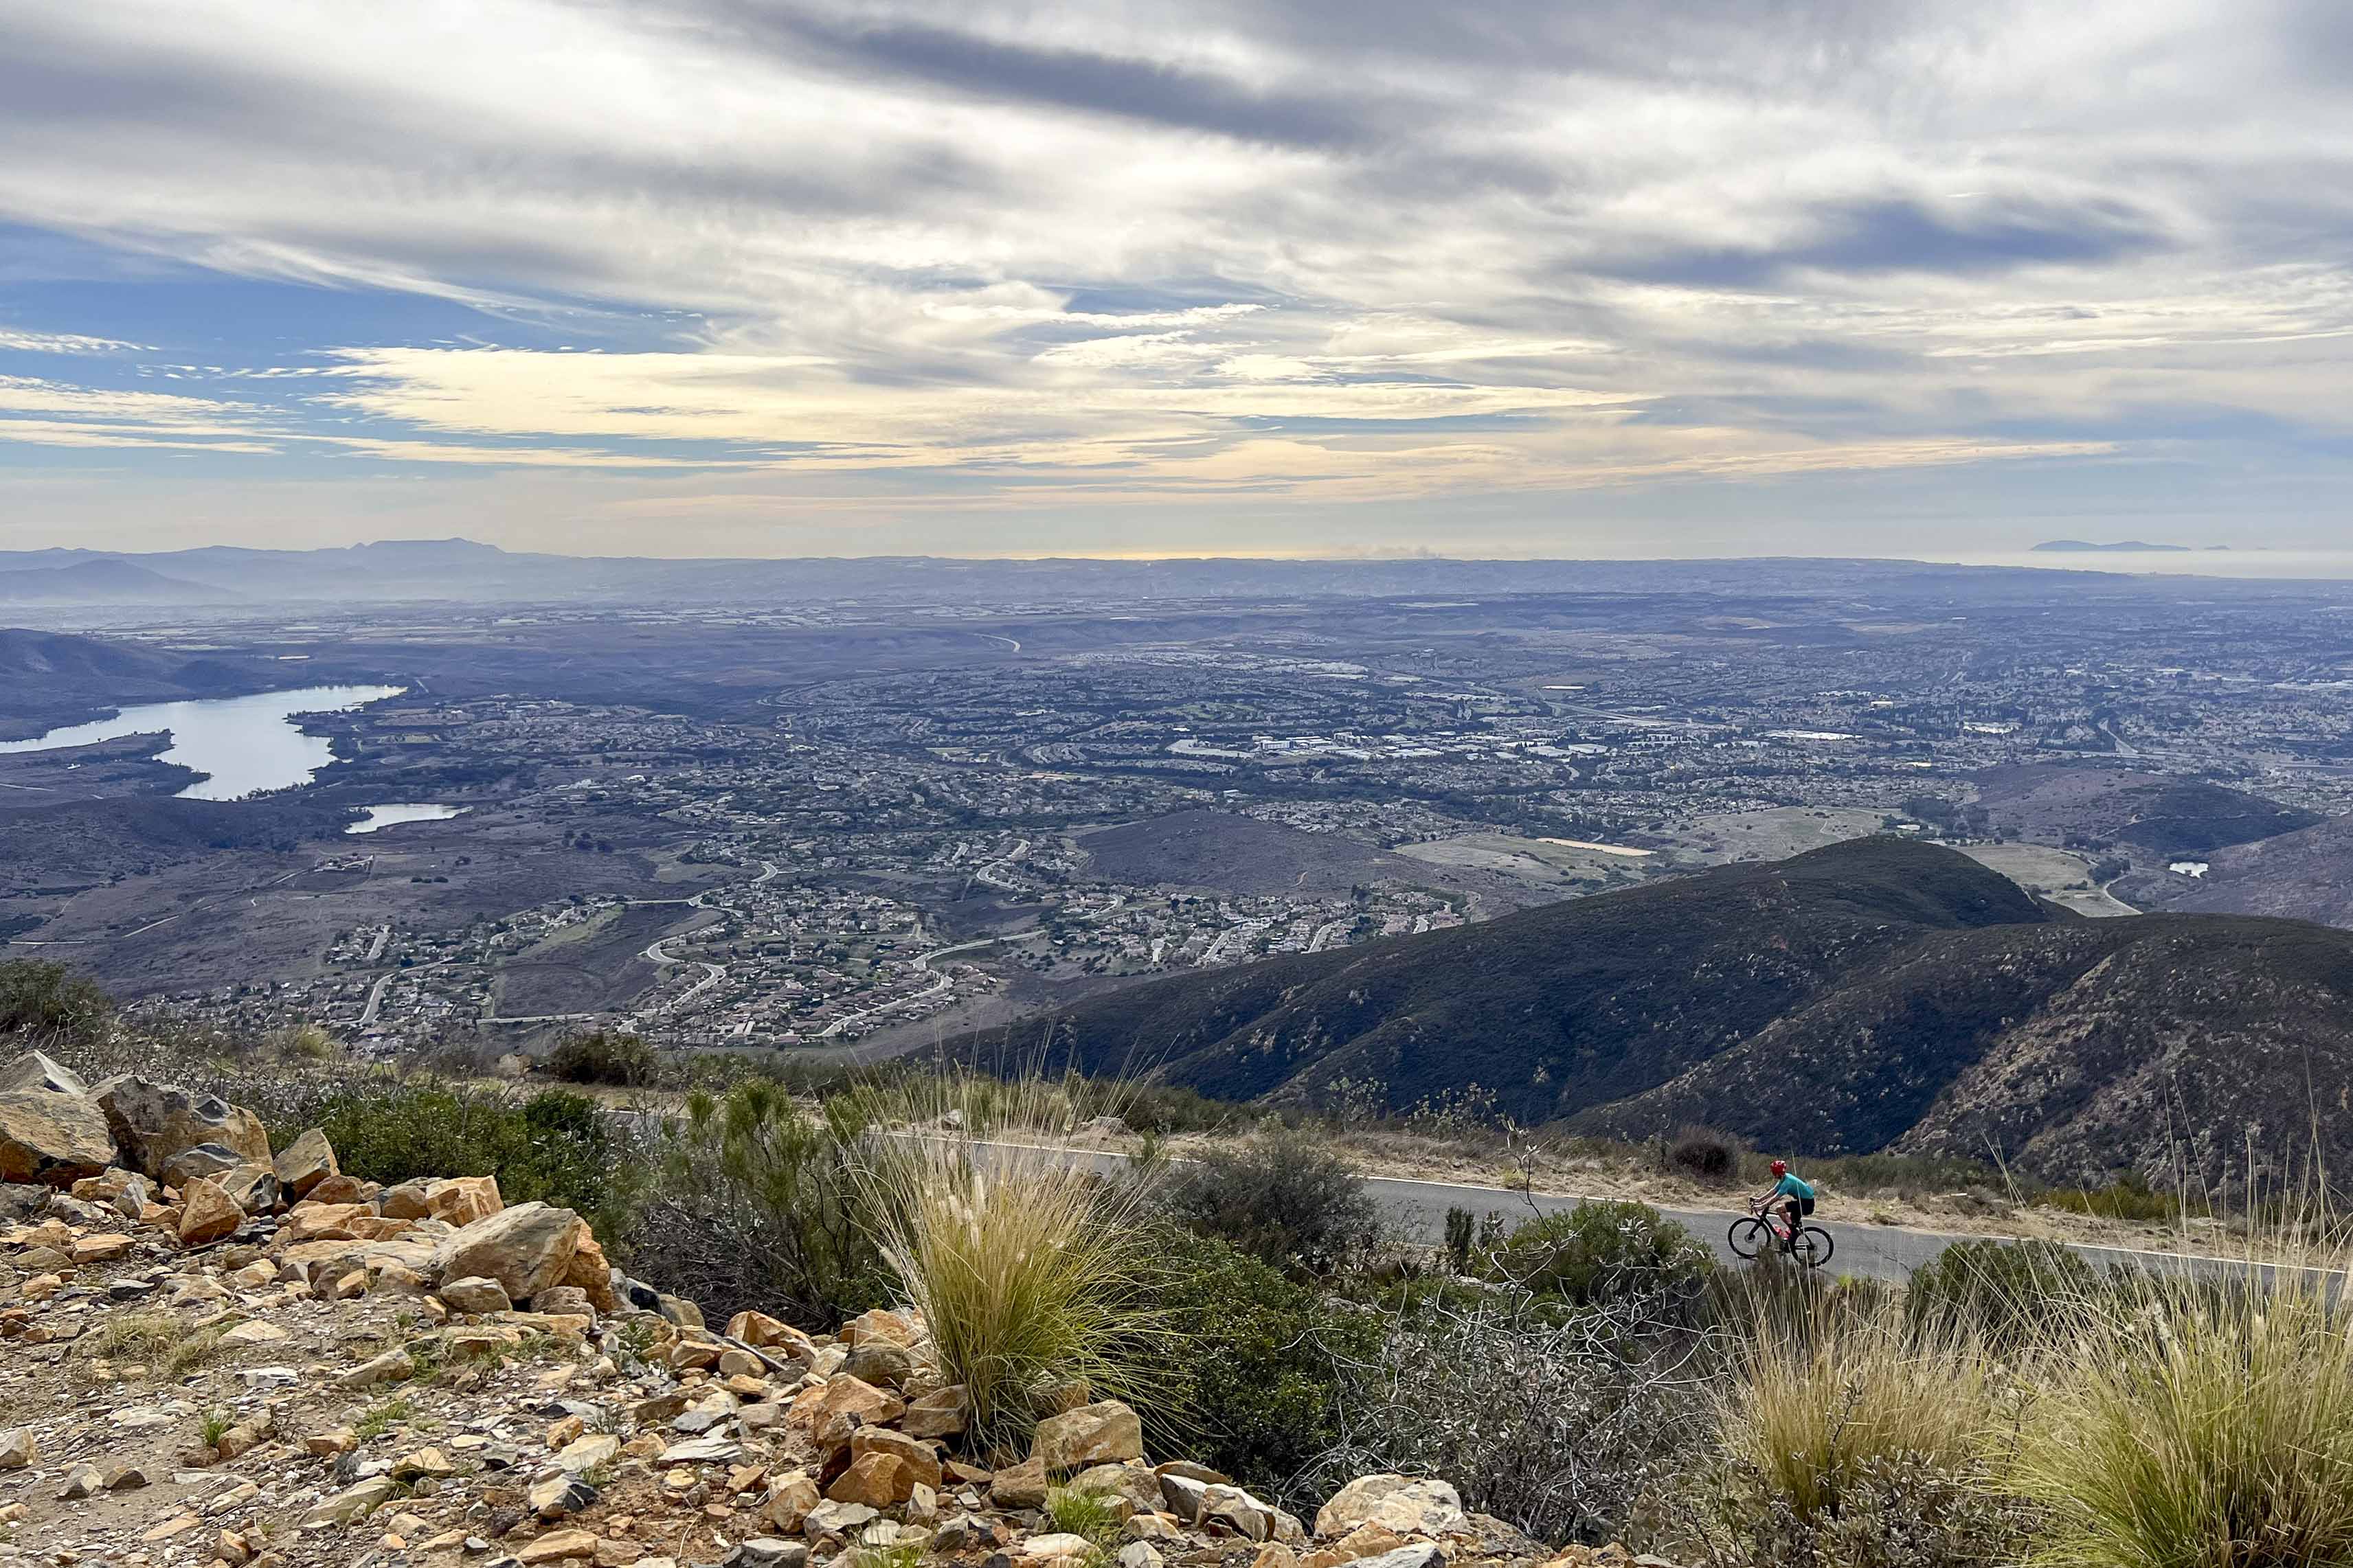 View of cyclist near the top of San Miguel Mountain in San Diego, California